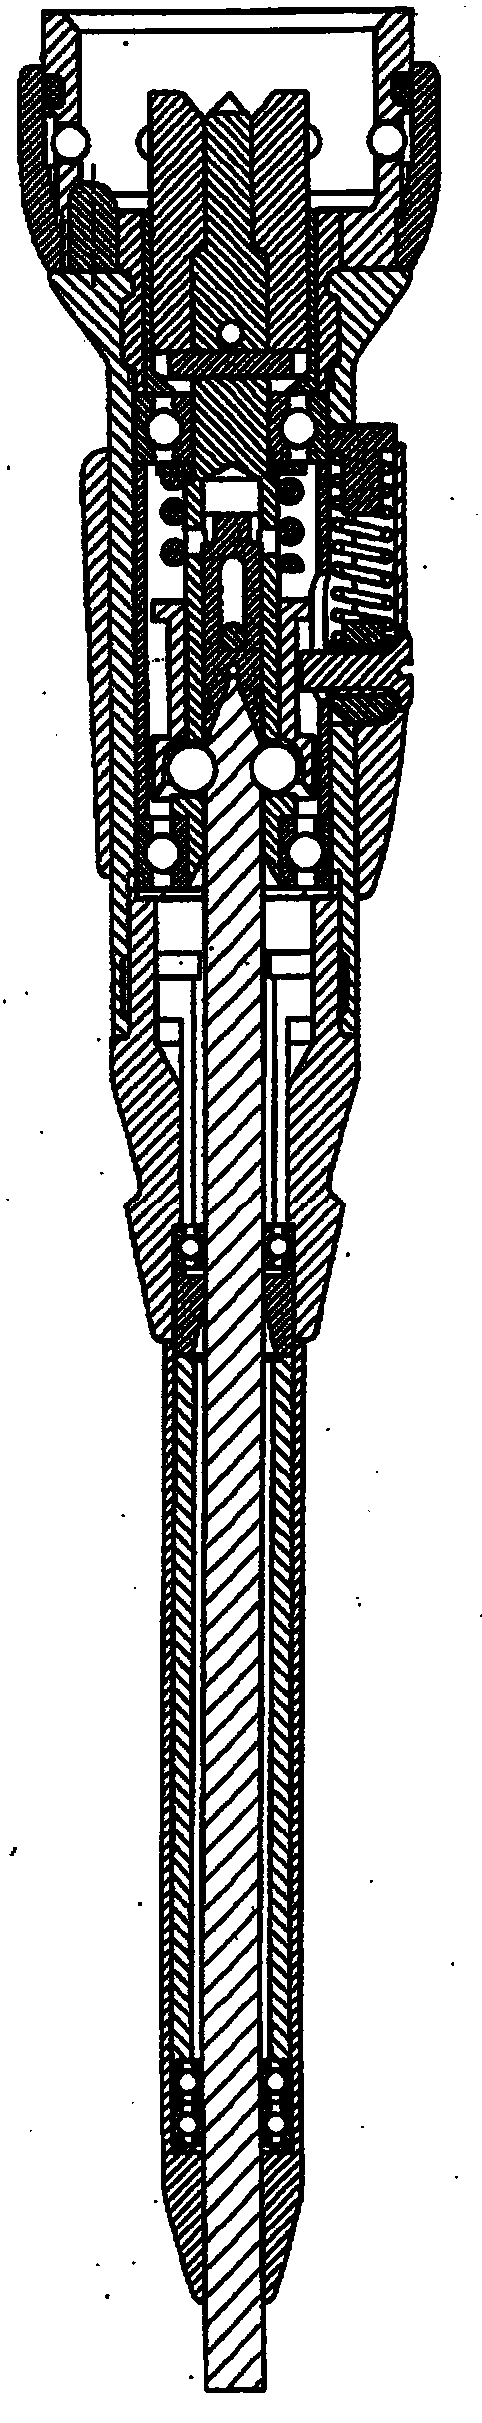 Surgical, torque transfer instruments including associated tools